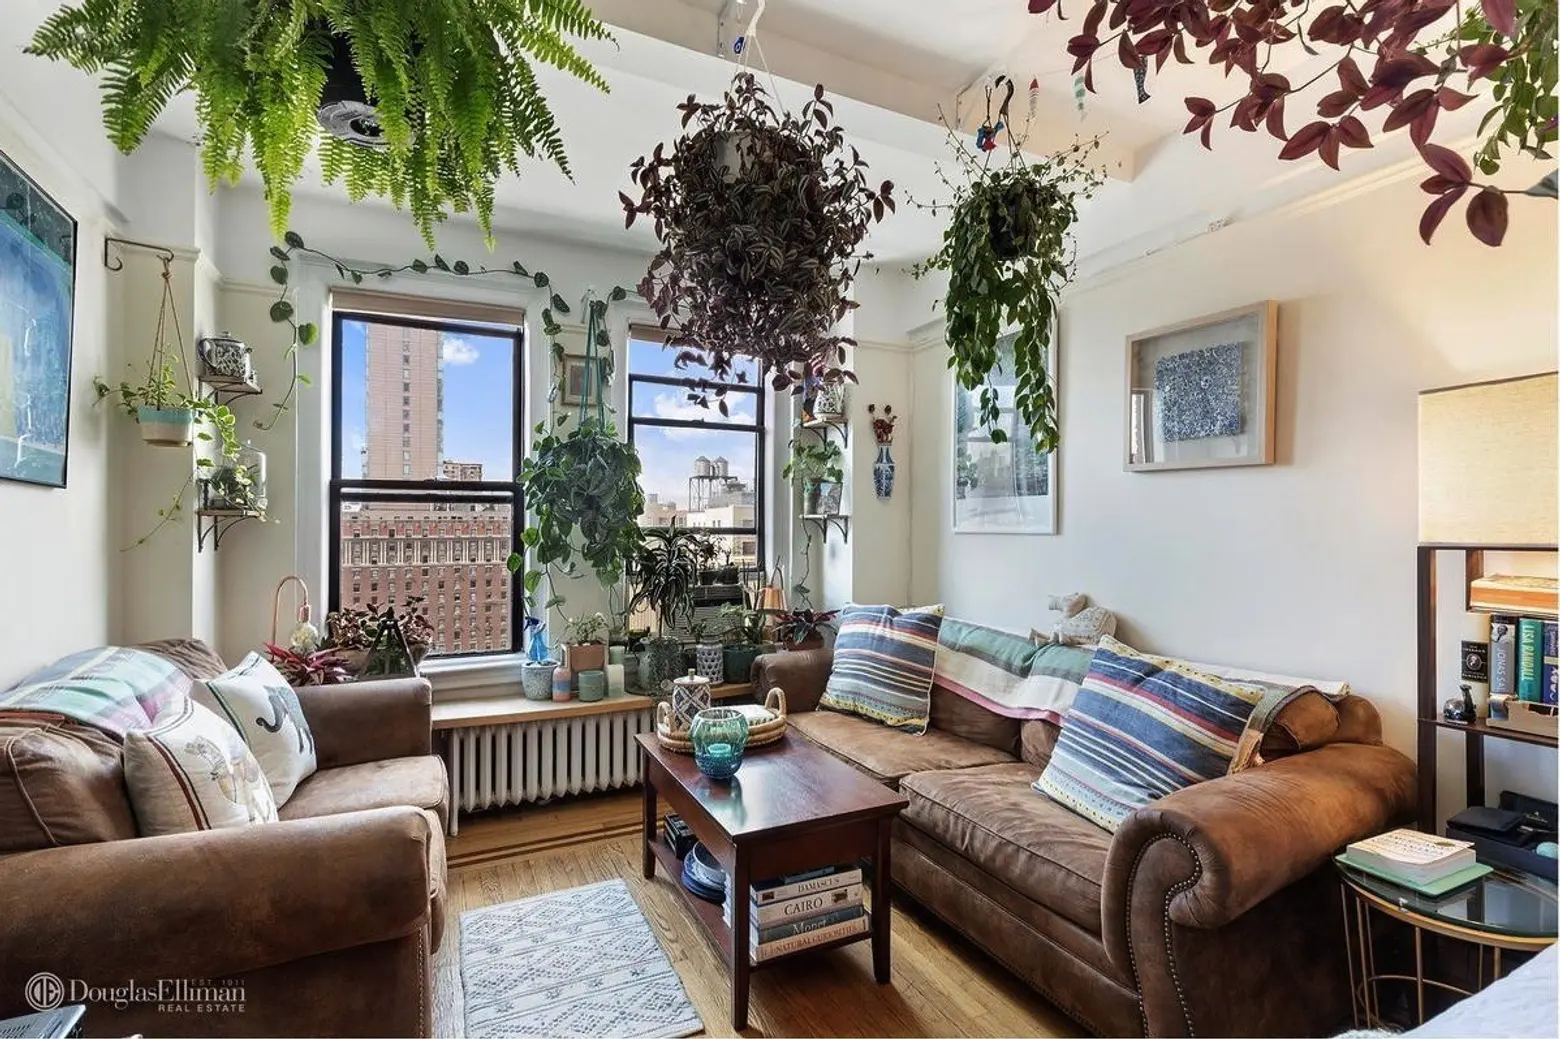 Lots of greenery at this sun-filled studio, asking $389K in the Upper West Side